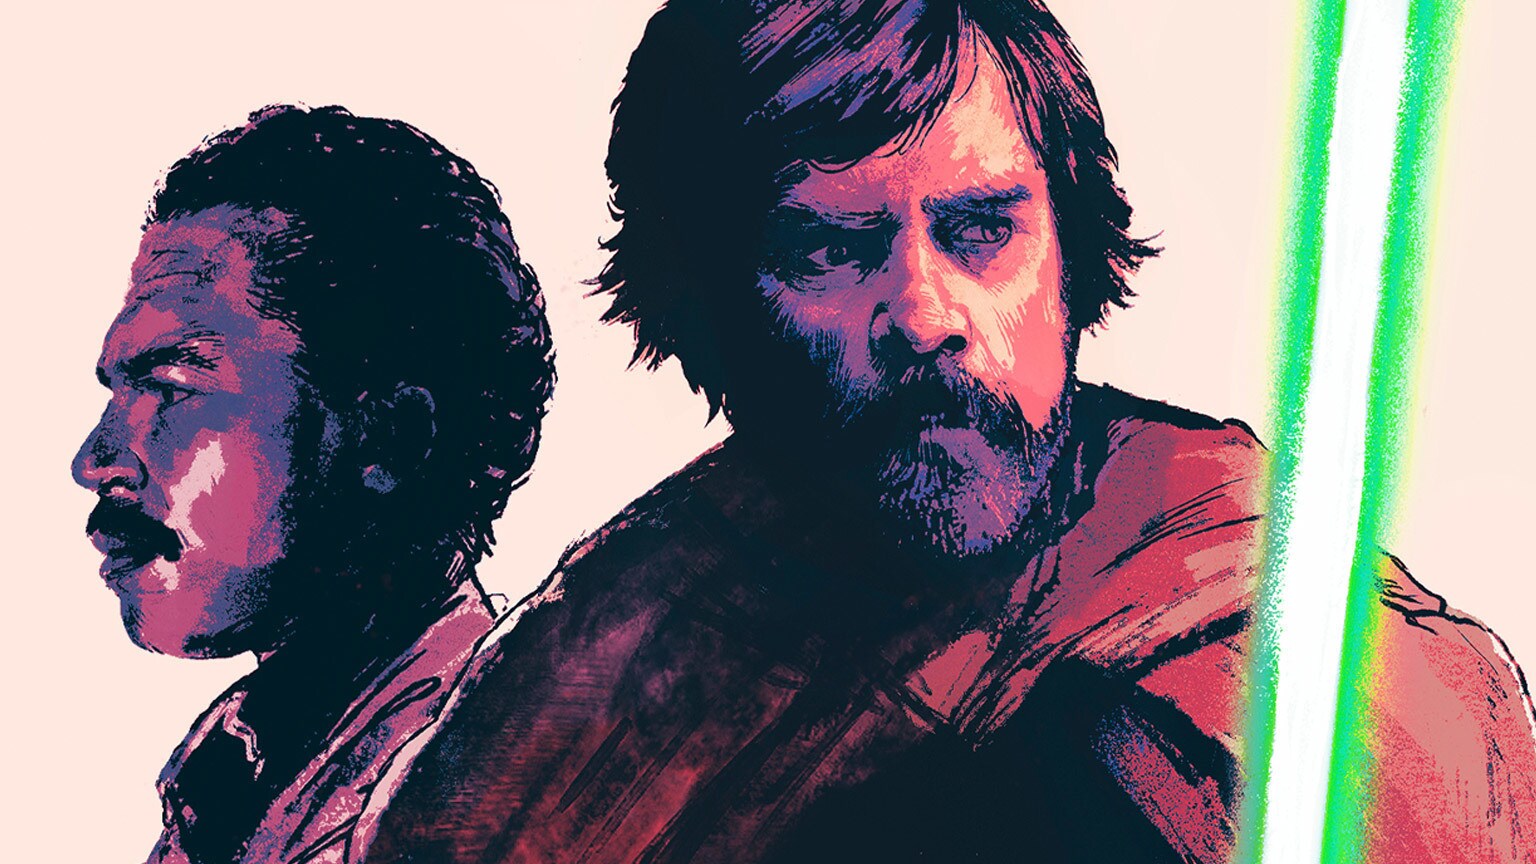 Luke Skywalker Fights to Survive Exegol in Star Wars: Shadow of the Sith - Exclusive Excerpt